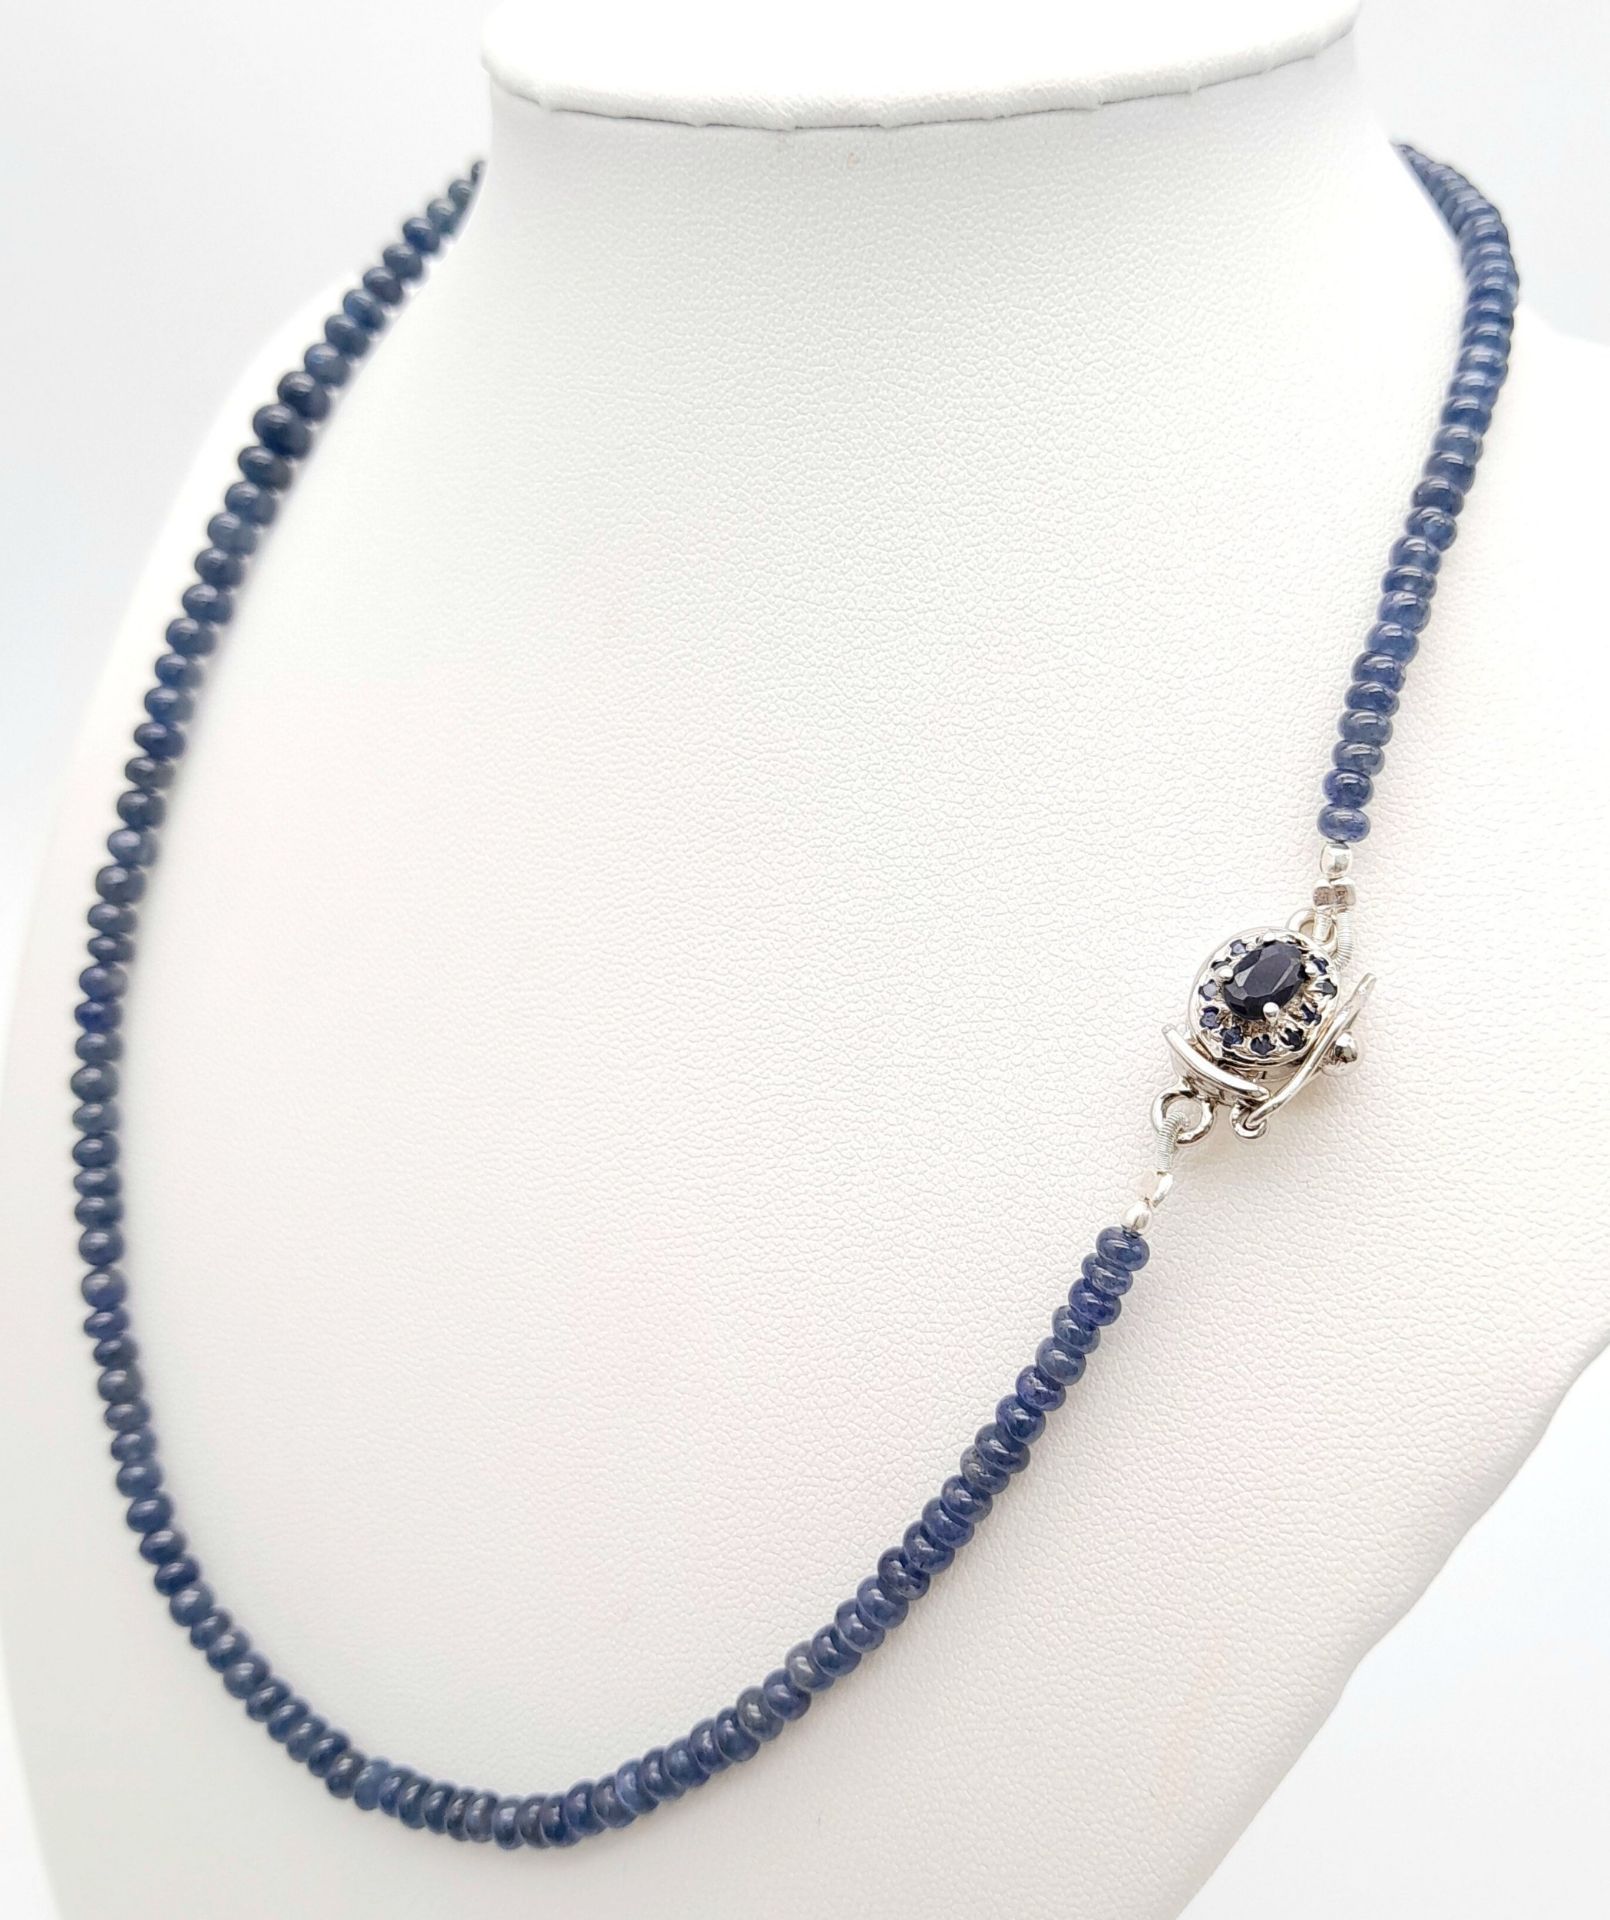 A 115ctw Blue Sapphire Small Rondelle Single Strand Necklace - with Sapphire and 925 Silver clasp. - Image 4 of 5